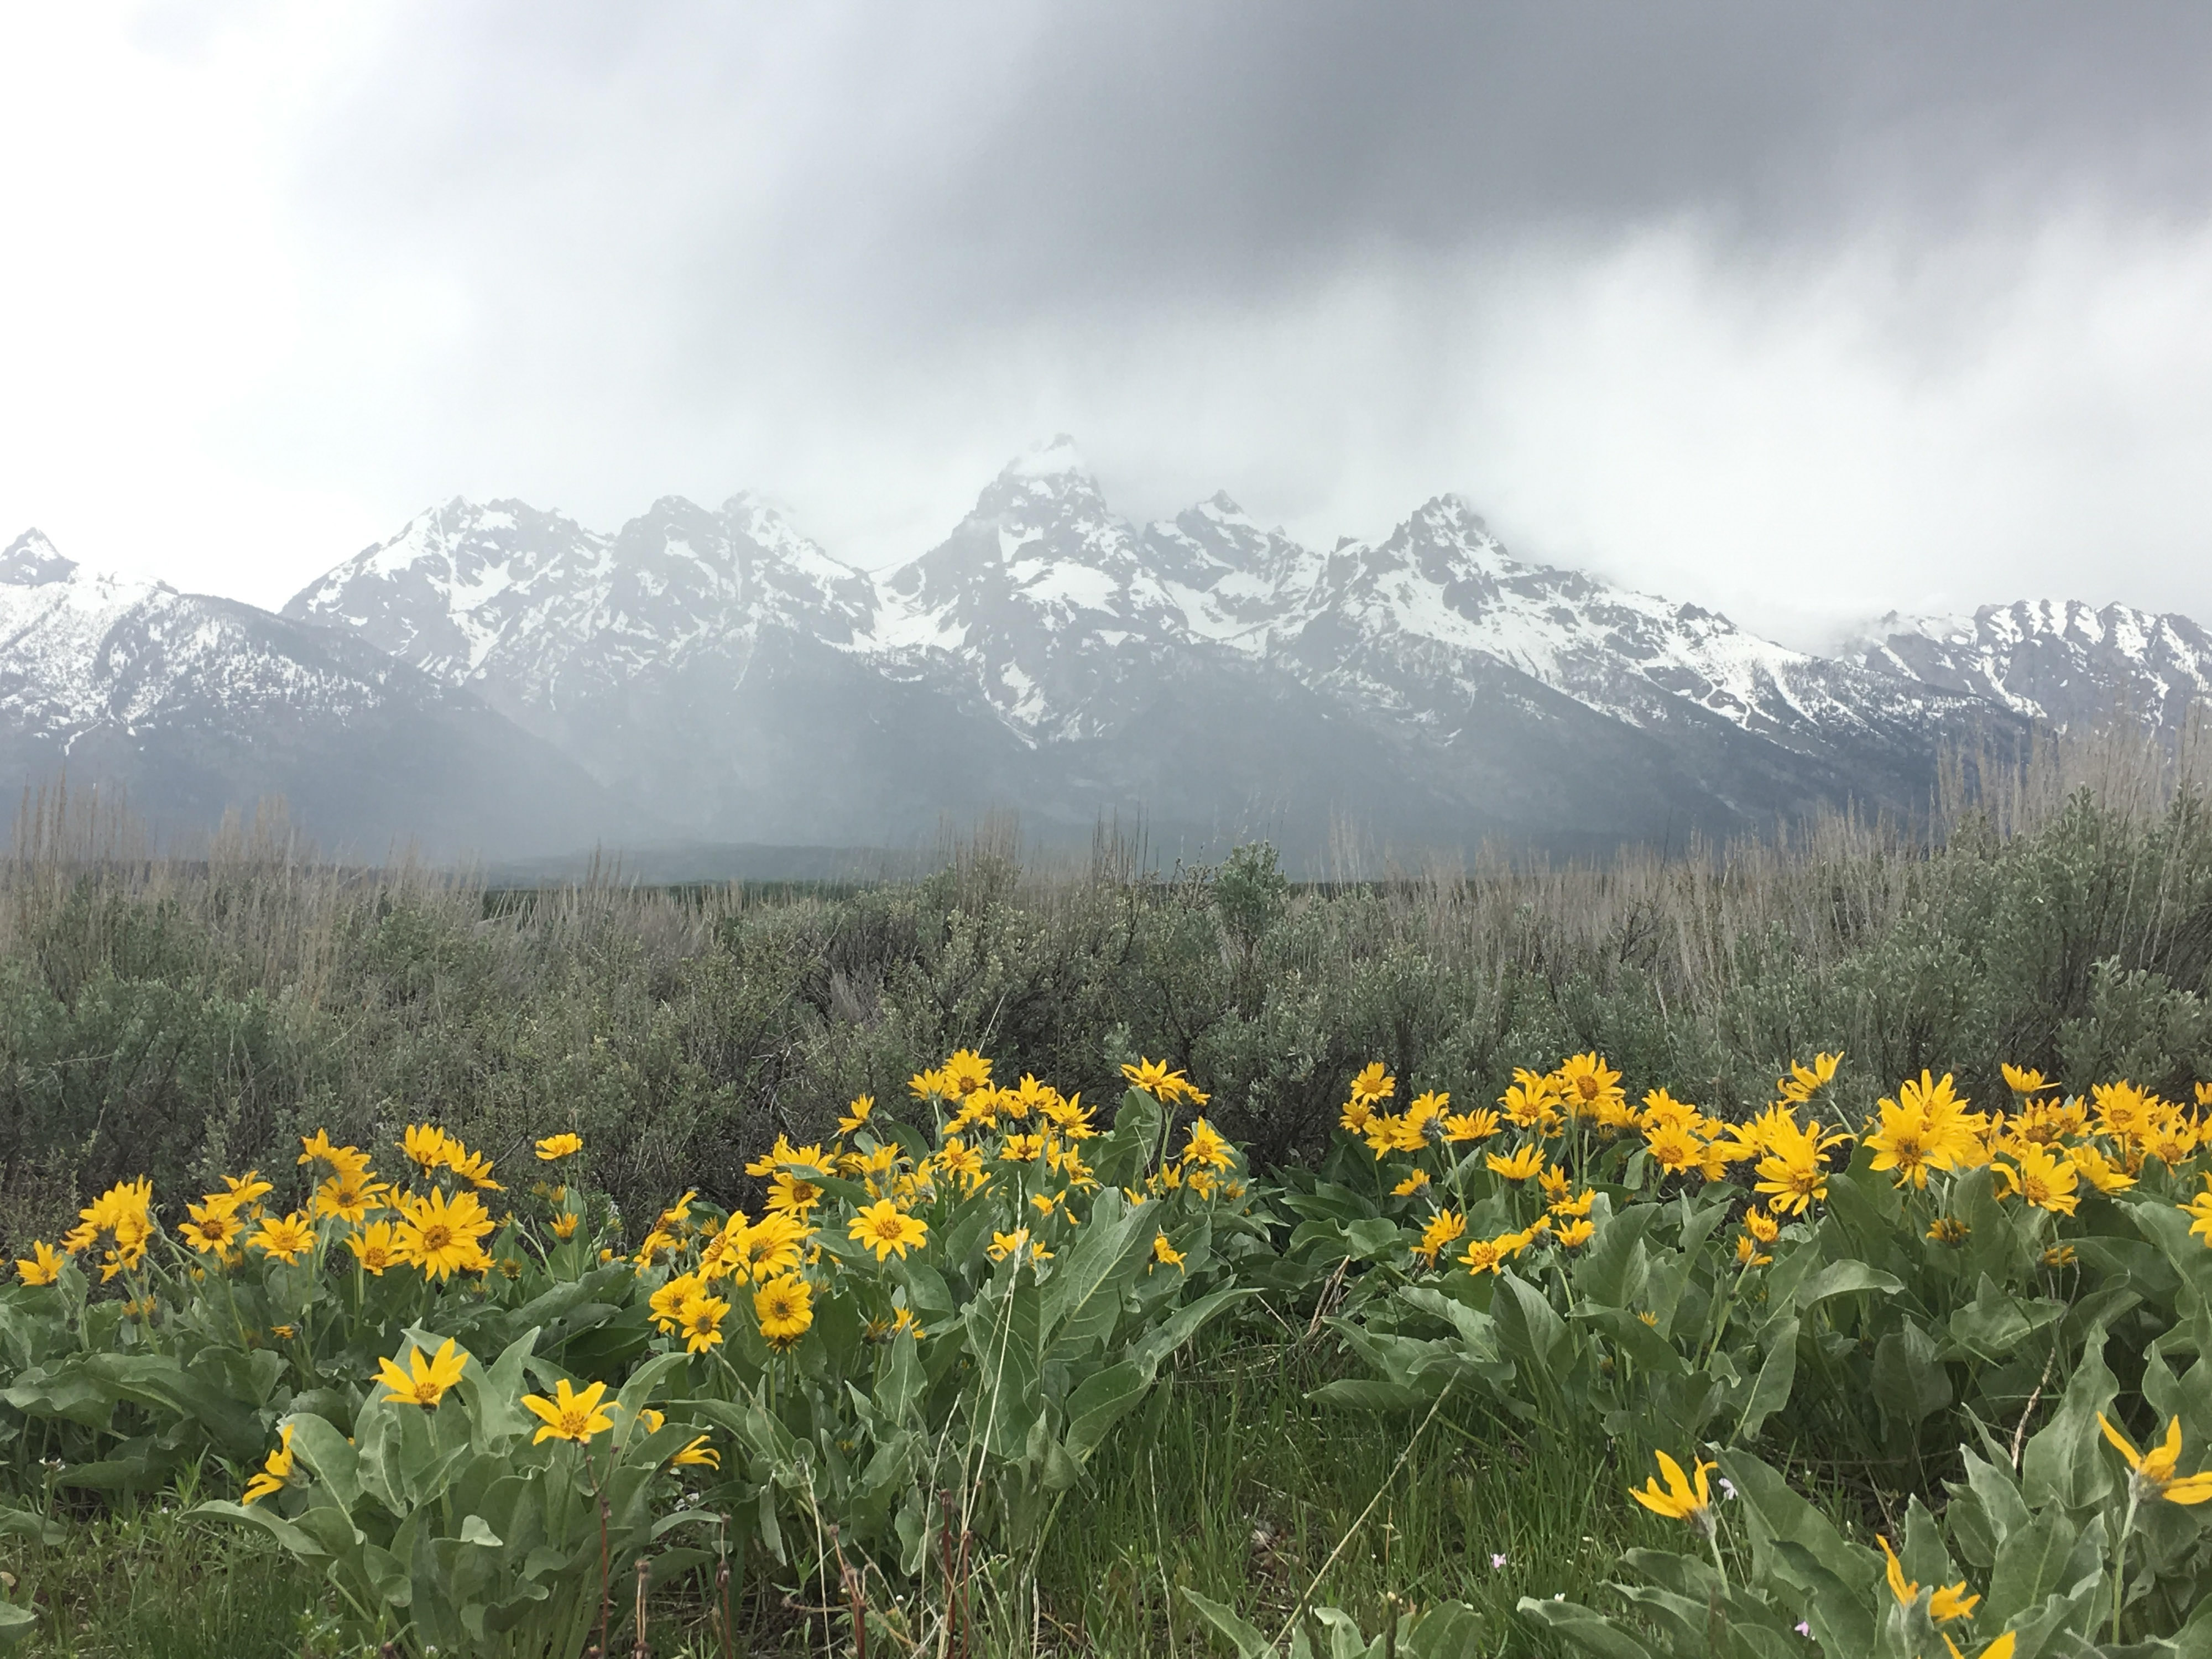 A snow-capped mountain on a foggy day with bright flowers and high grasses in the foreground